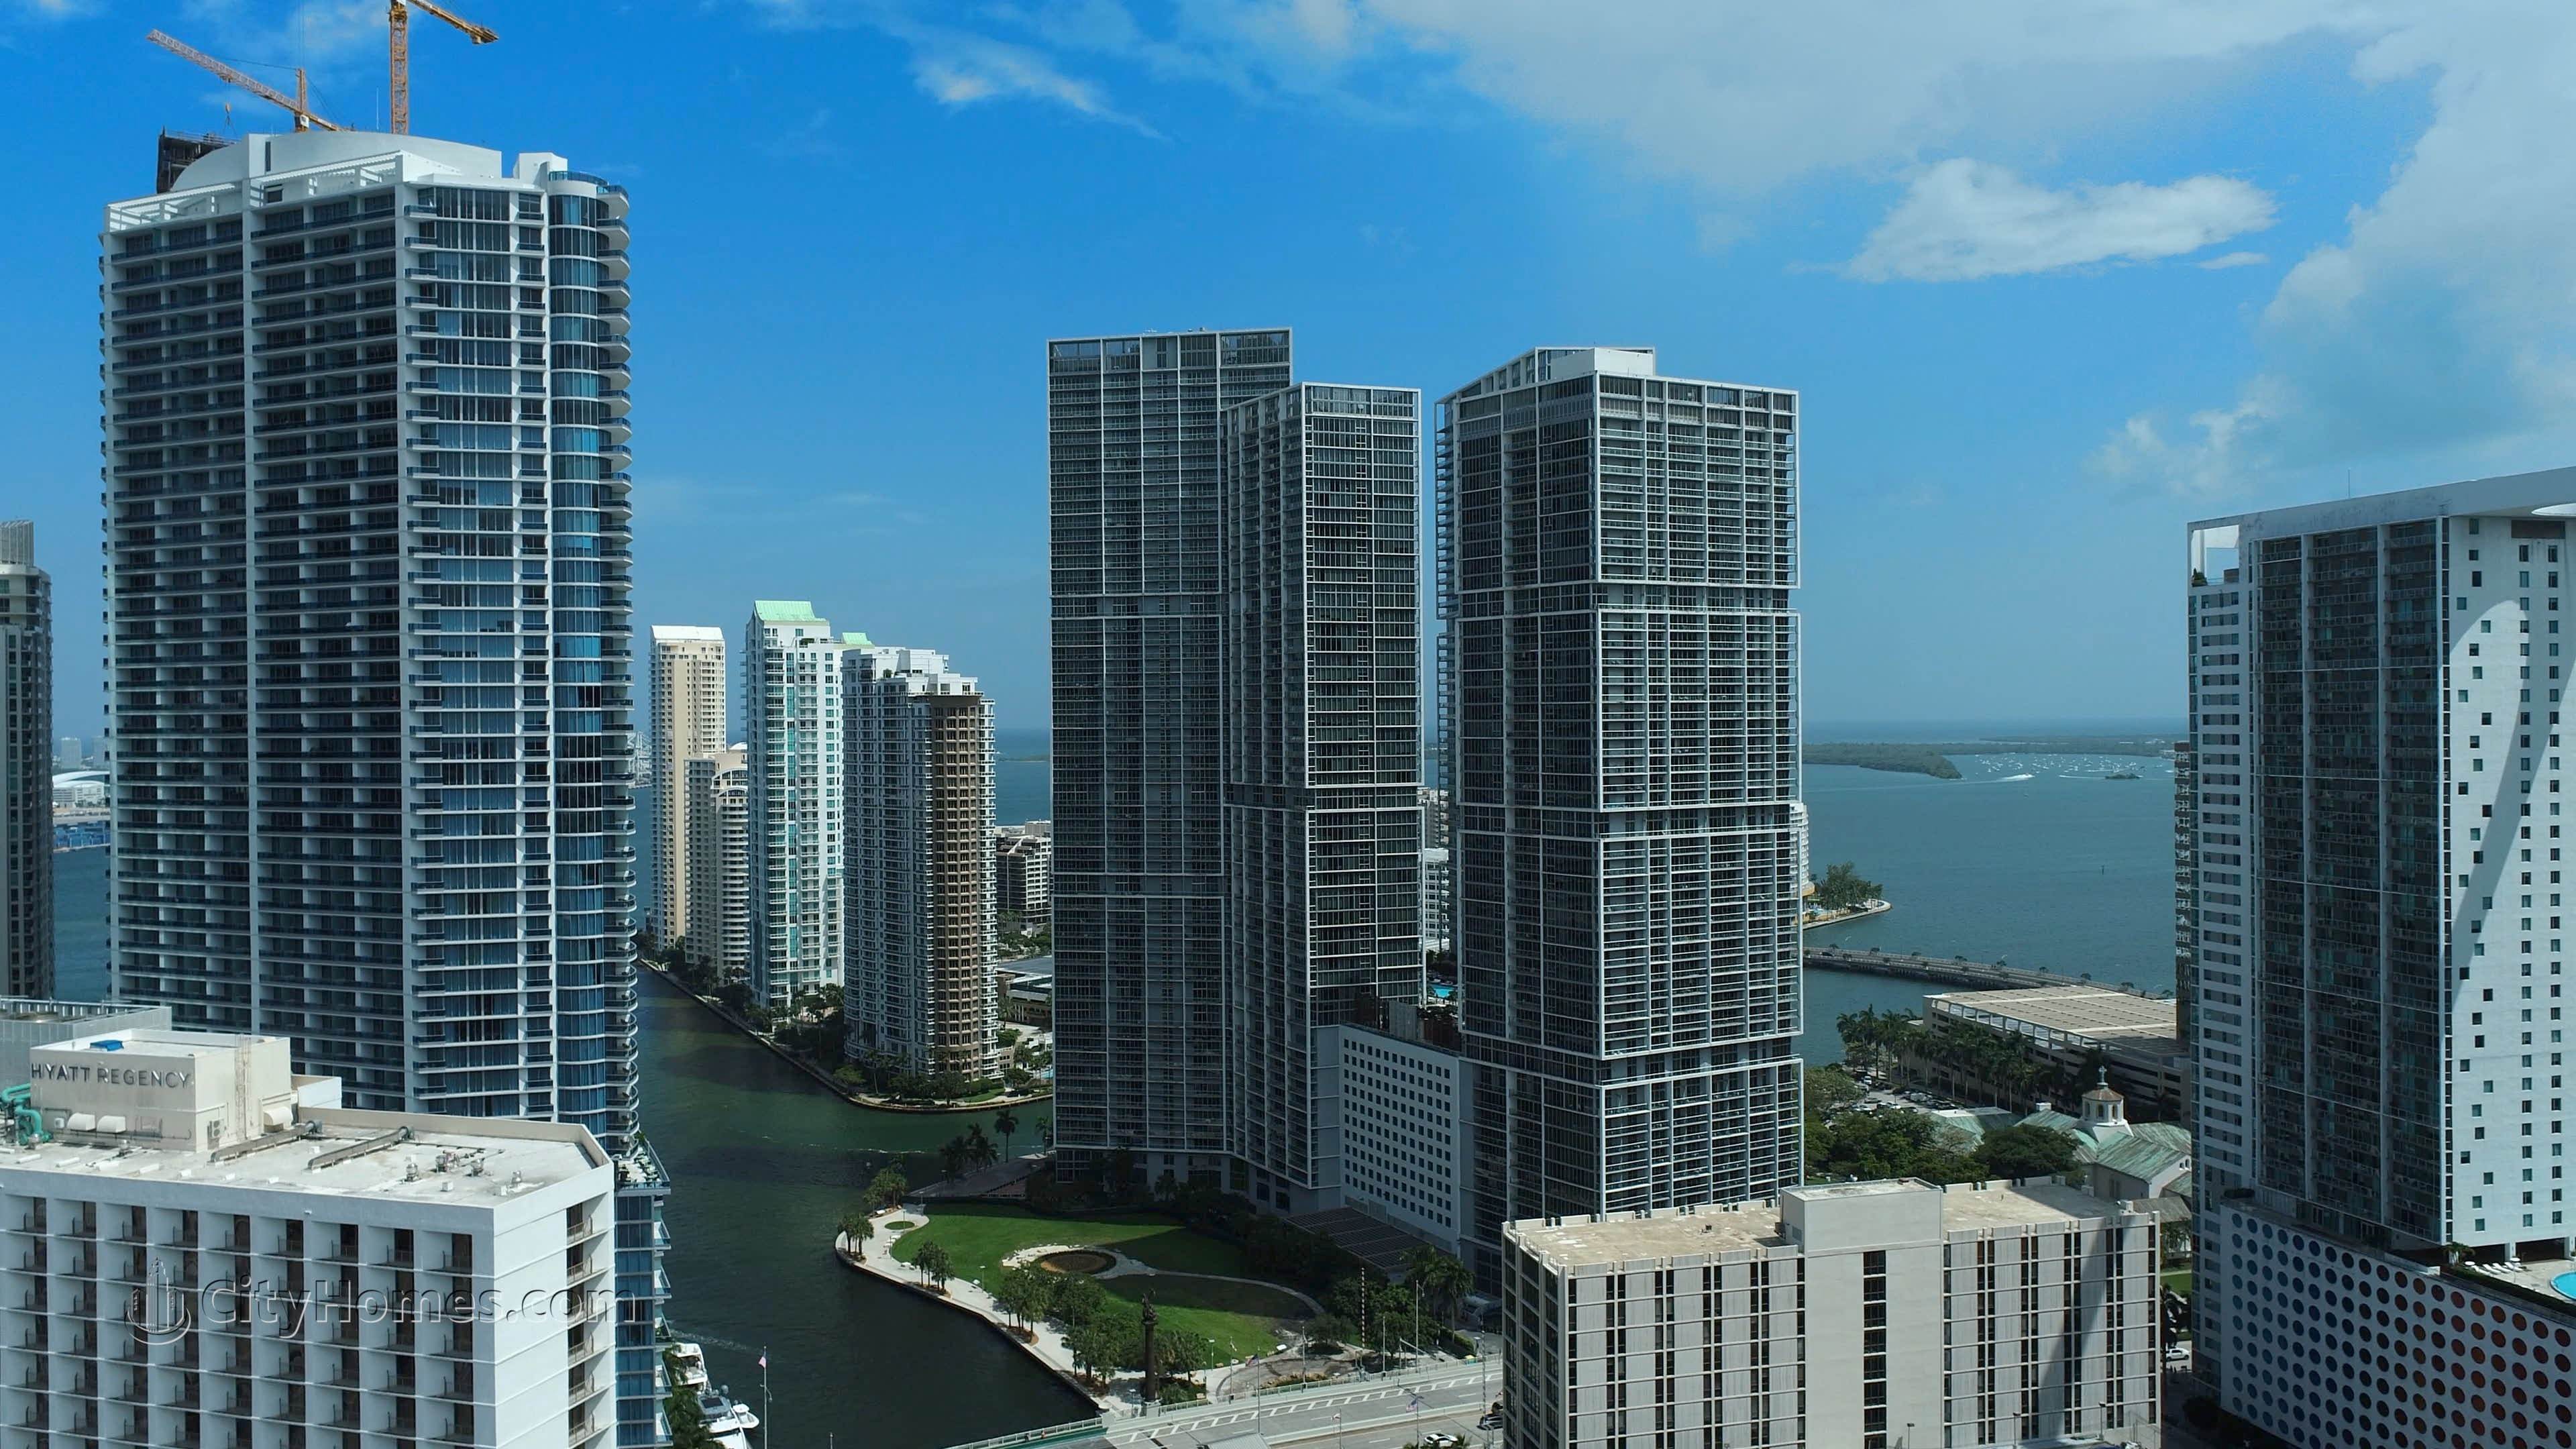 ICON Brickell Tower 1 κτίριο σε 465 And 475 Brickell Ave, Miami, FL 33131